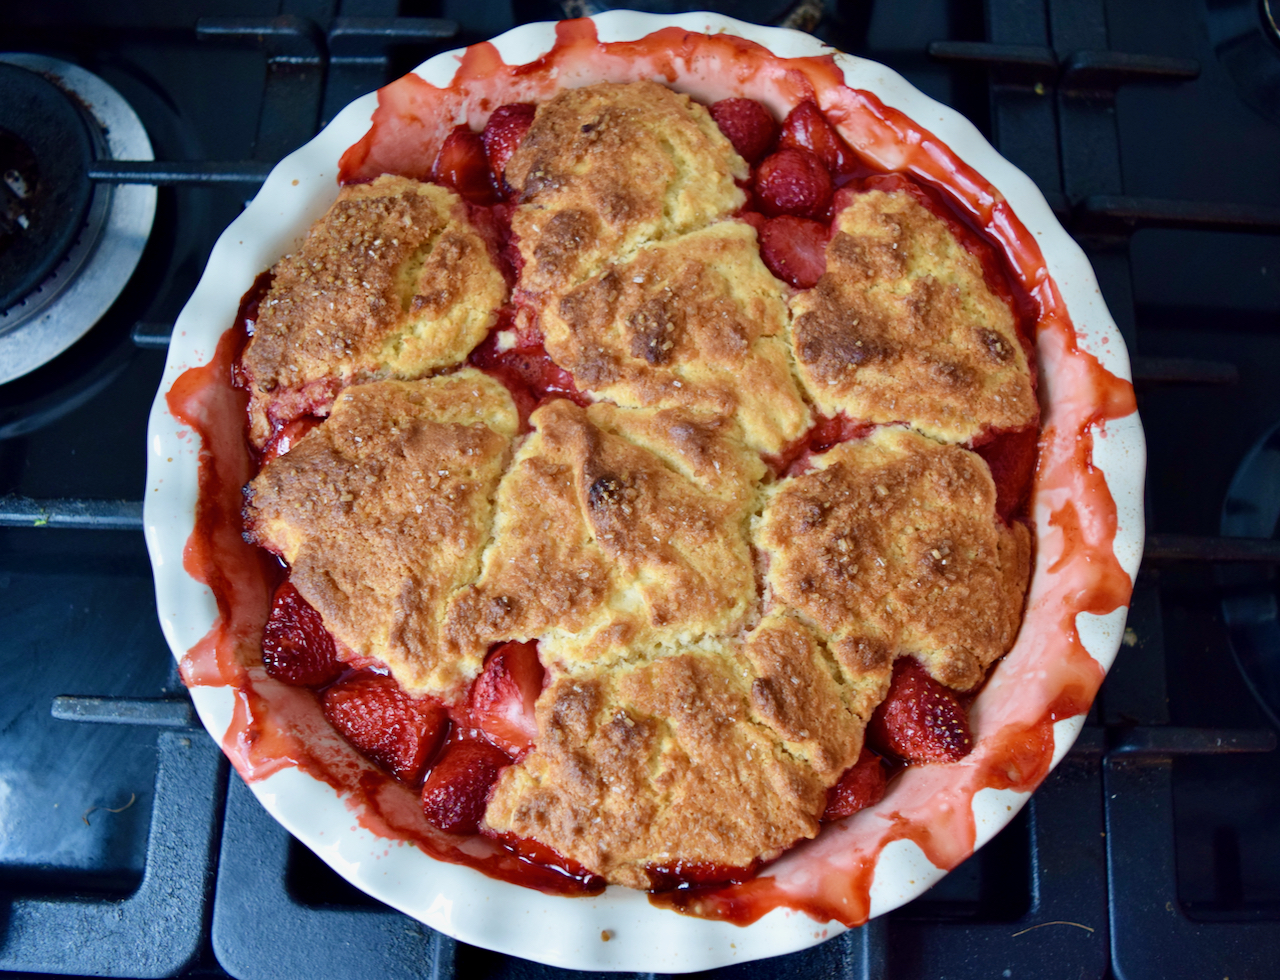 Strawberry and Elderflower Cobbler recipe from Lucy Loves Food Blog